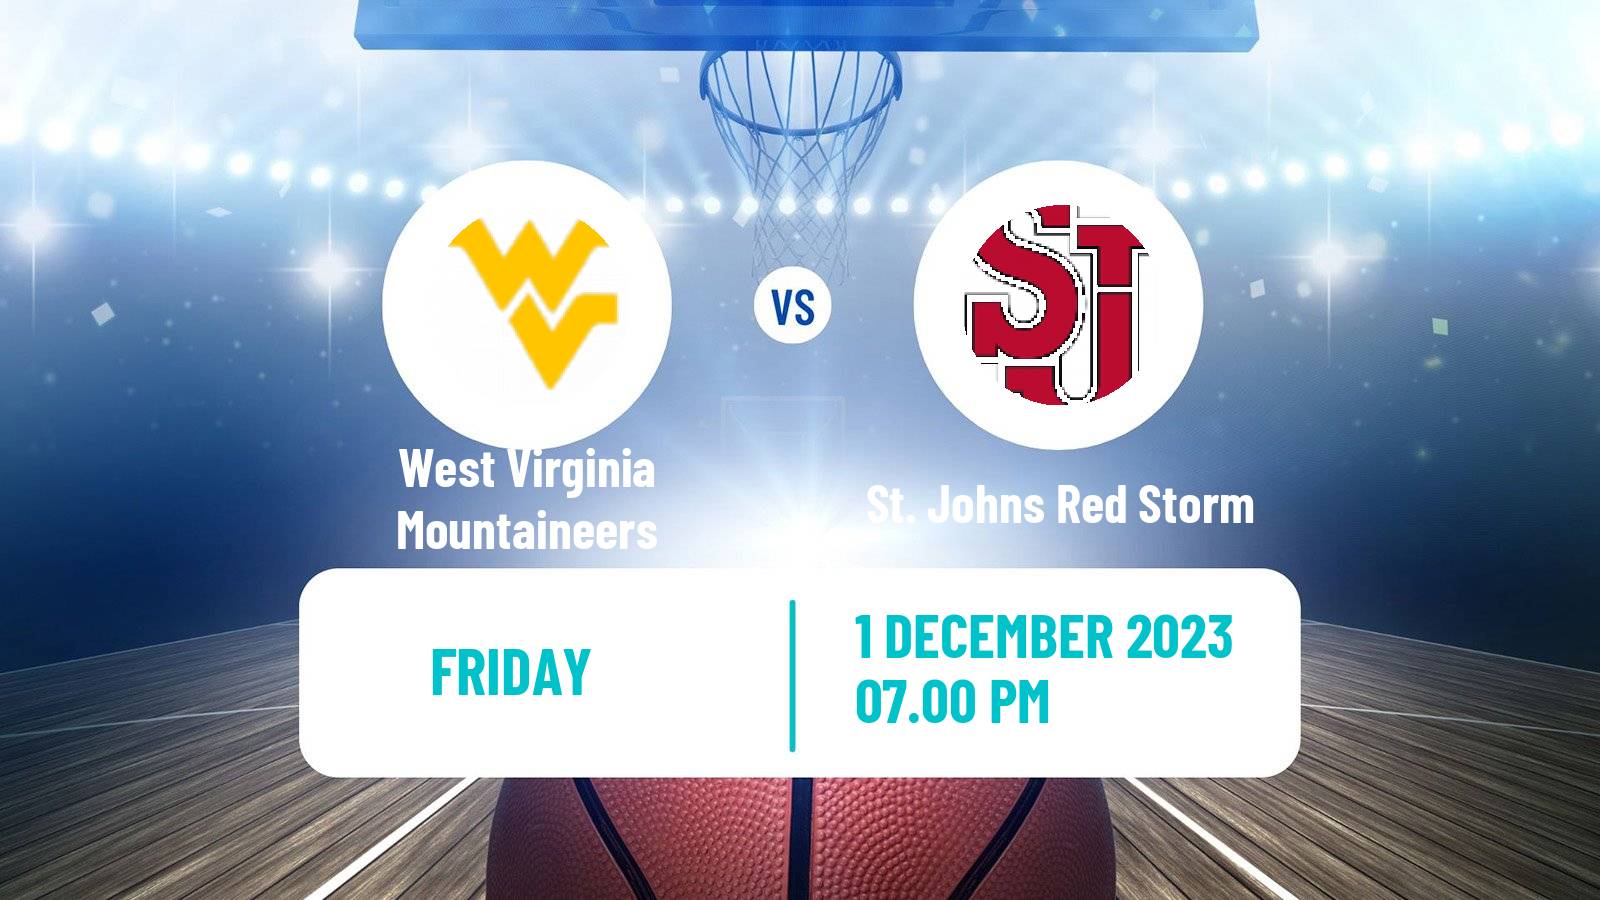 Basketball NCAA College Basketball West Virginia Mountaineers - St. Johns Red Storm